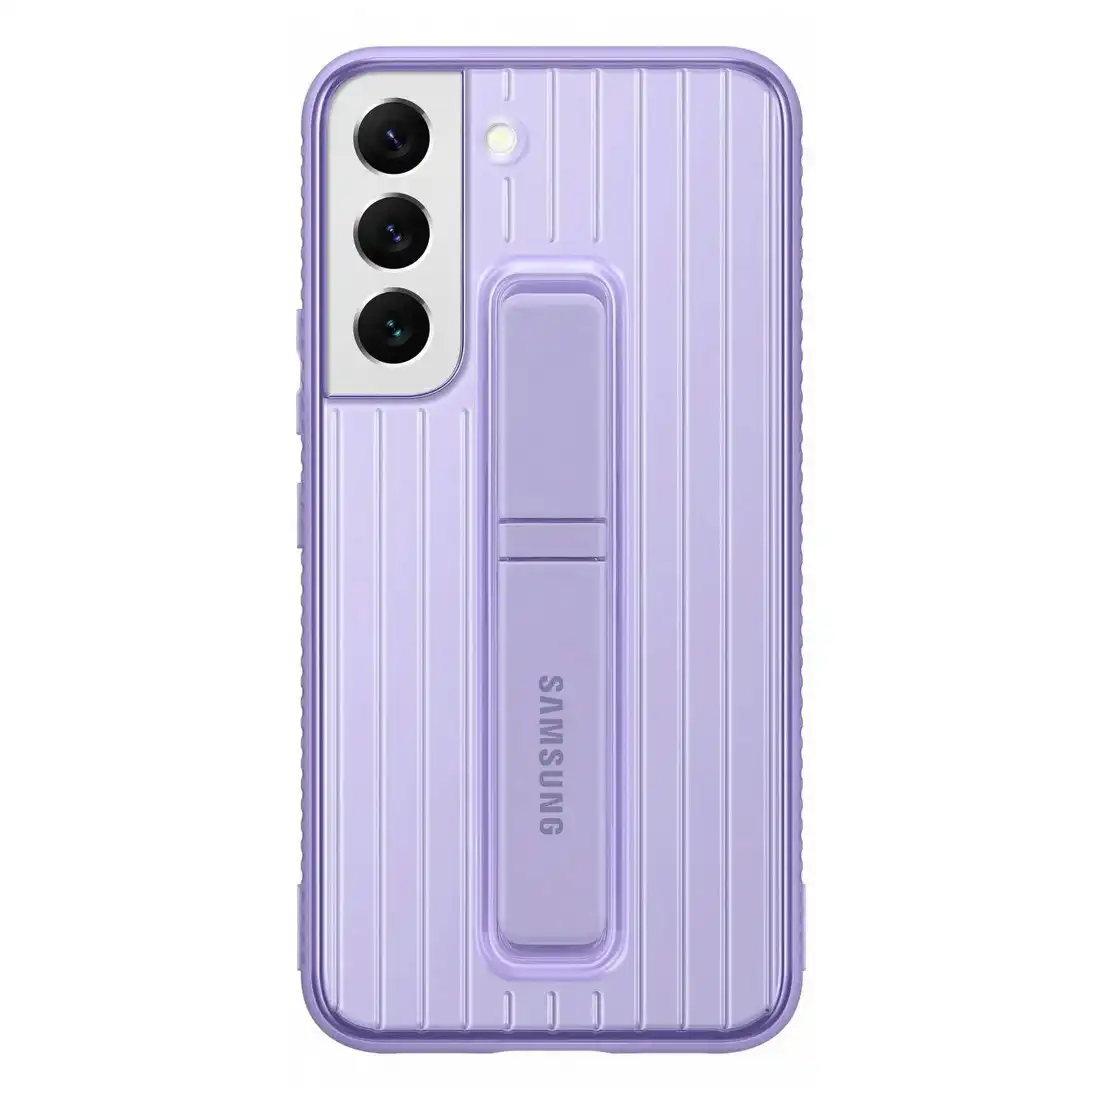 Samsung Galaxy S22 Protective Stand Cover EF-RS901CVEGWW - Lavender